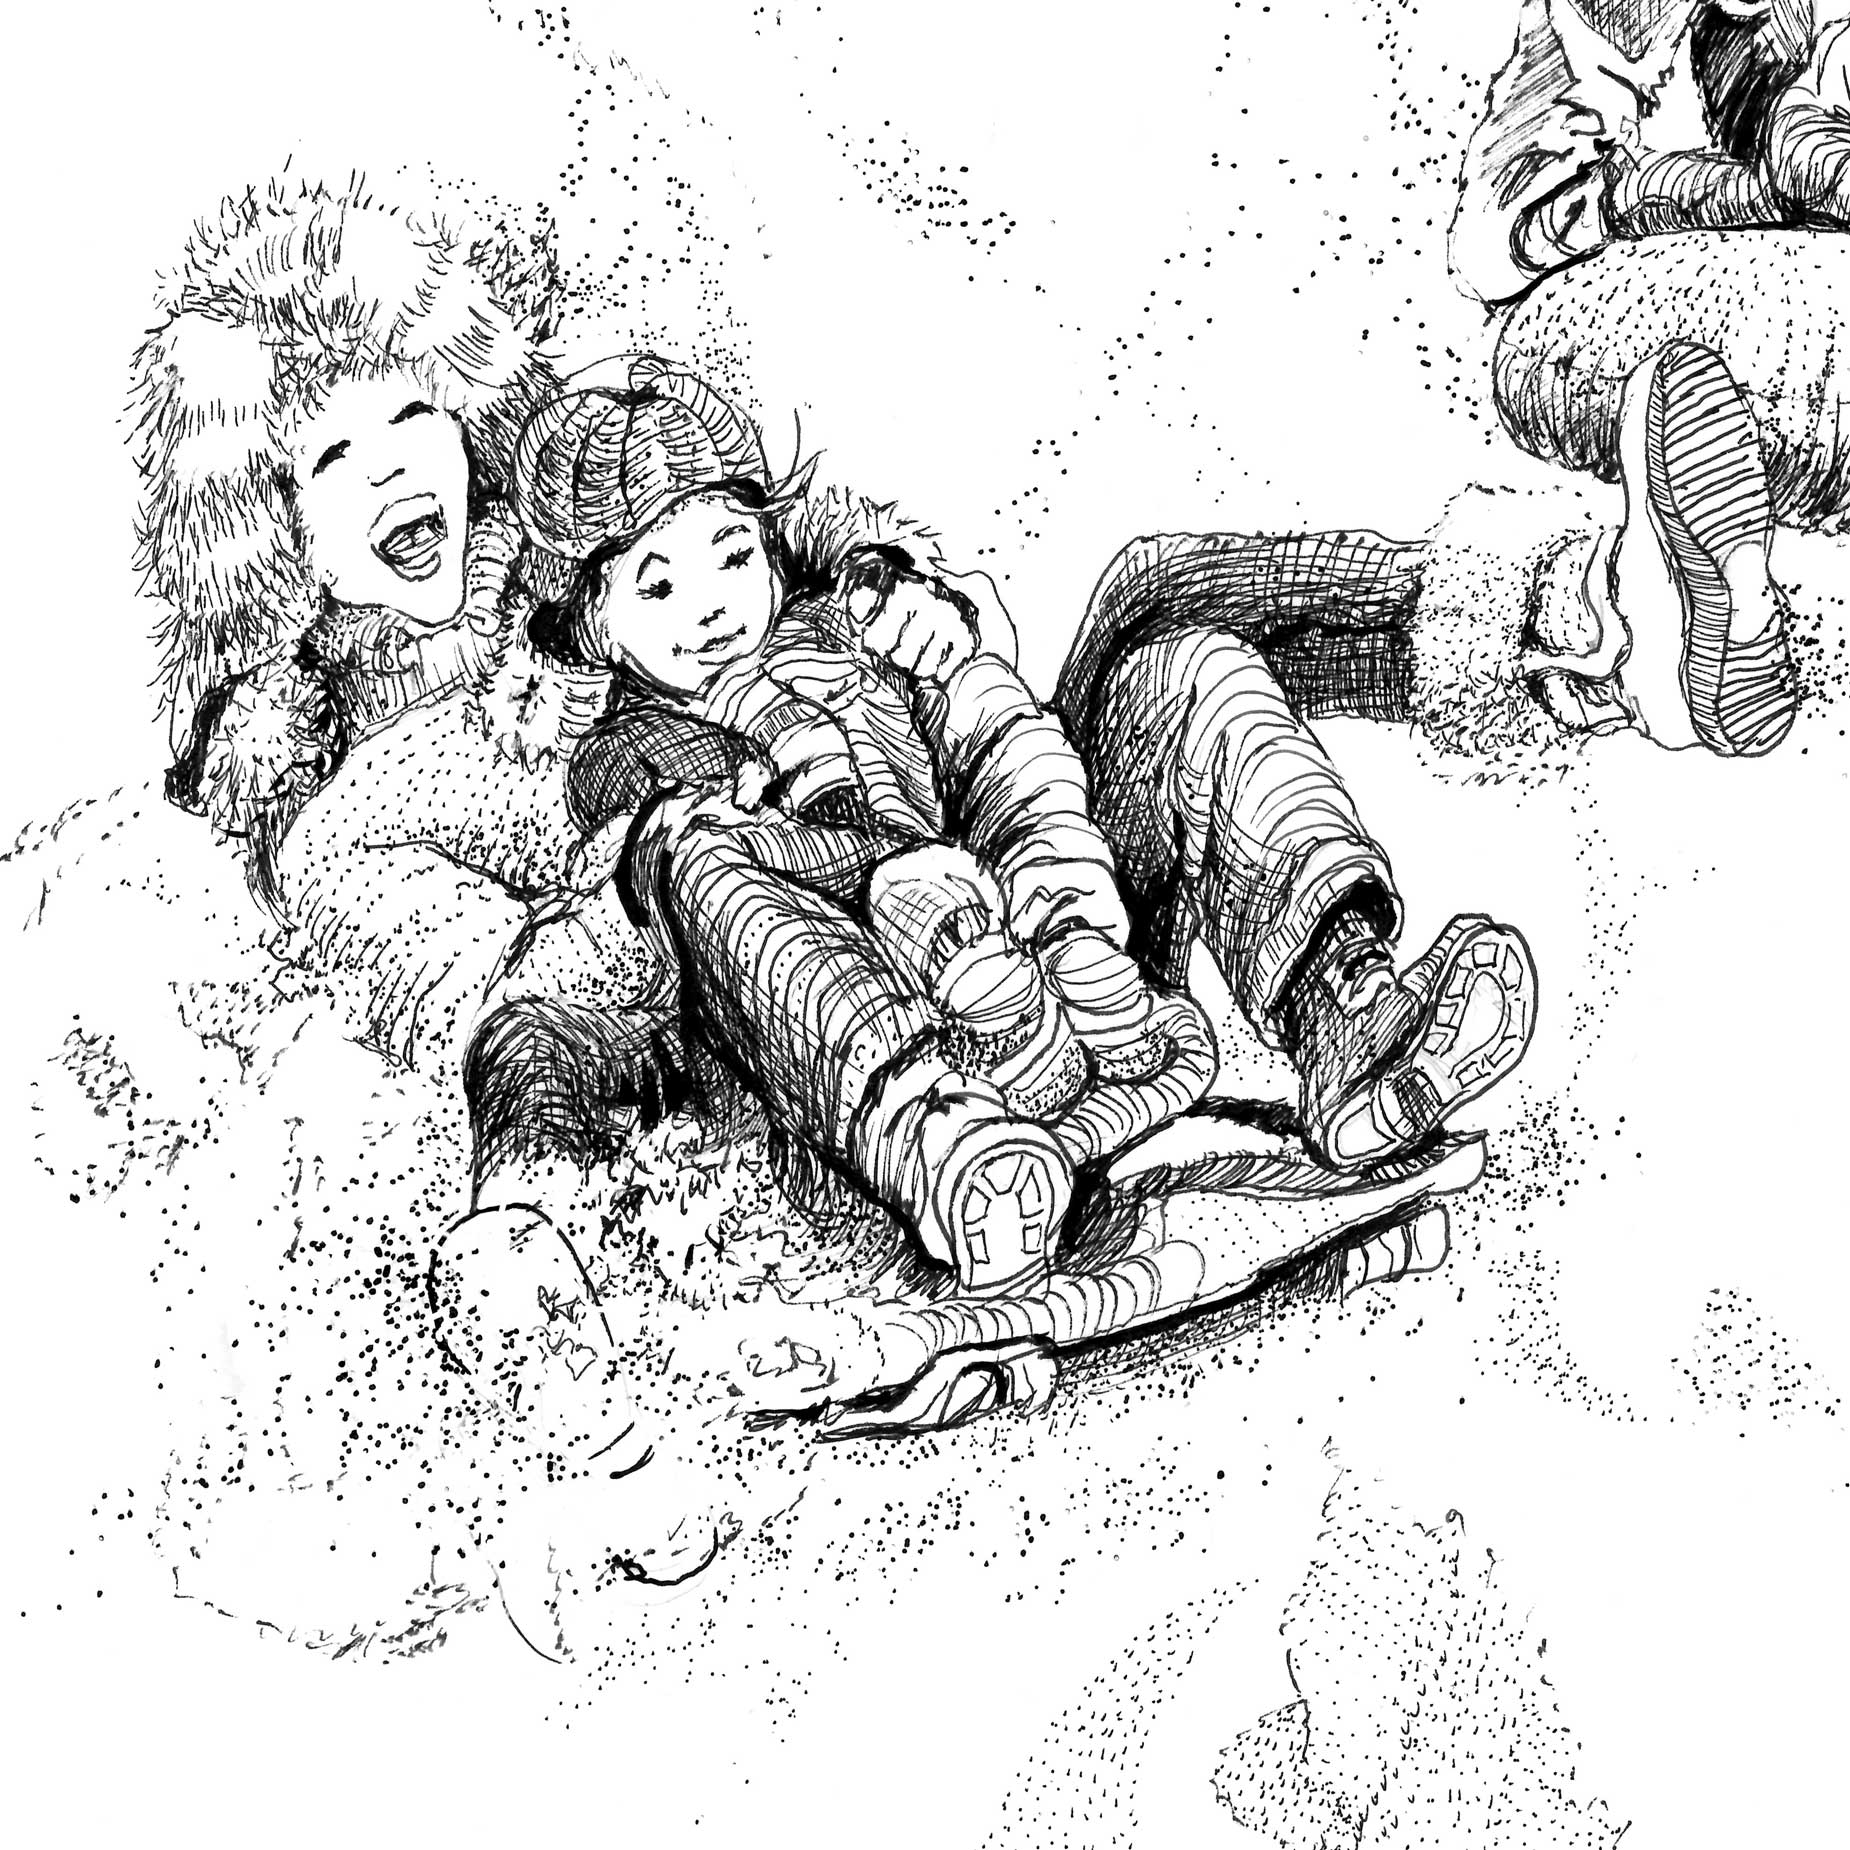 Pencil sketch of children playing cards James Colter : r/ImaginaryChild